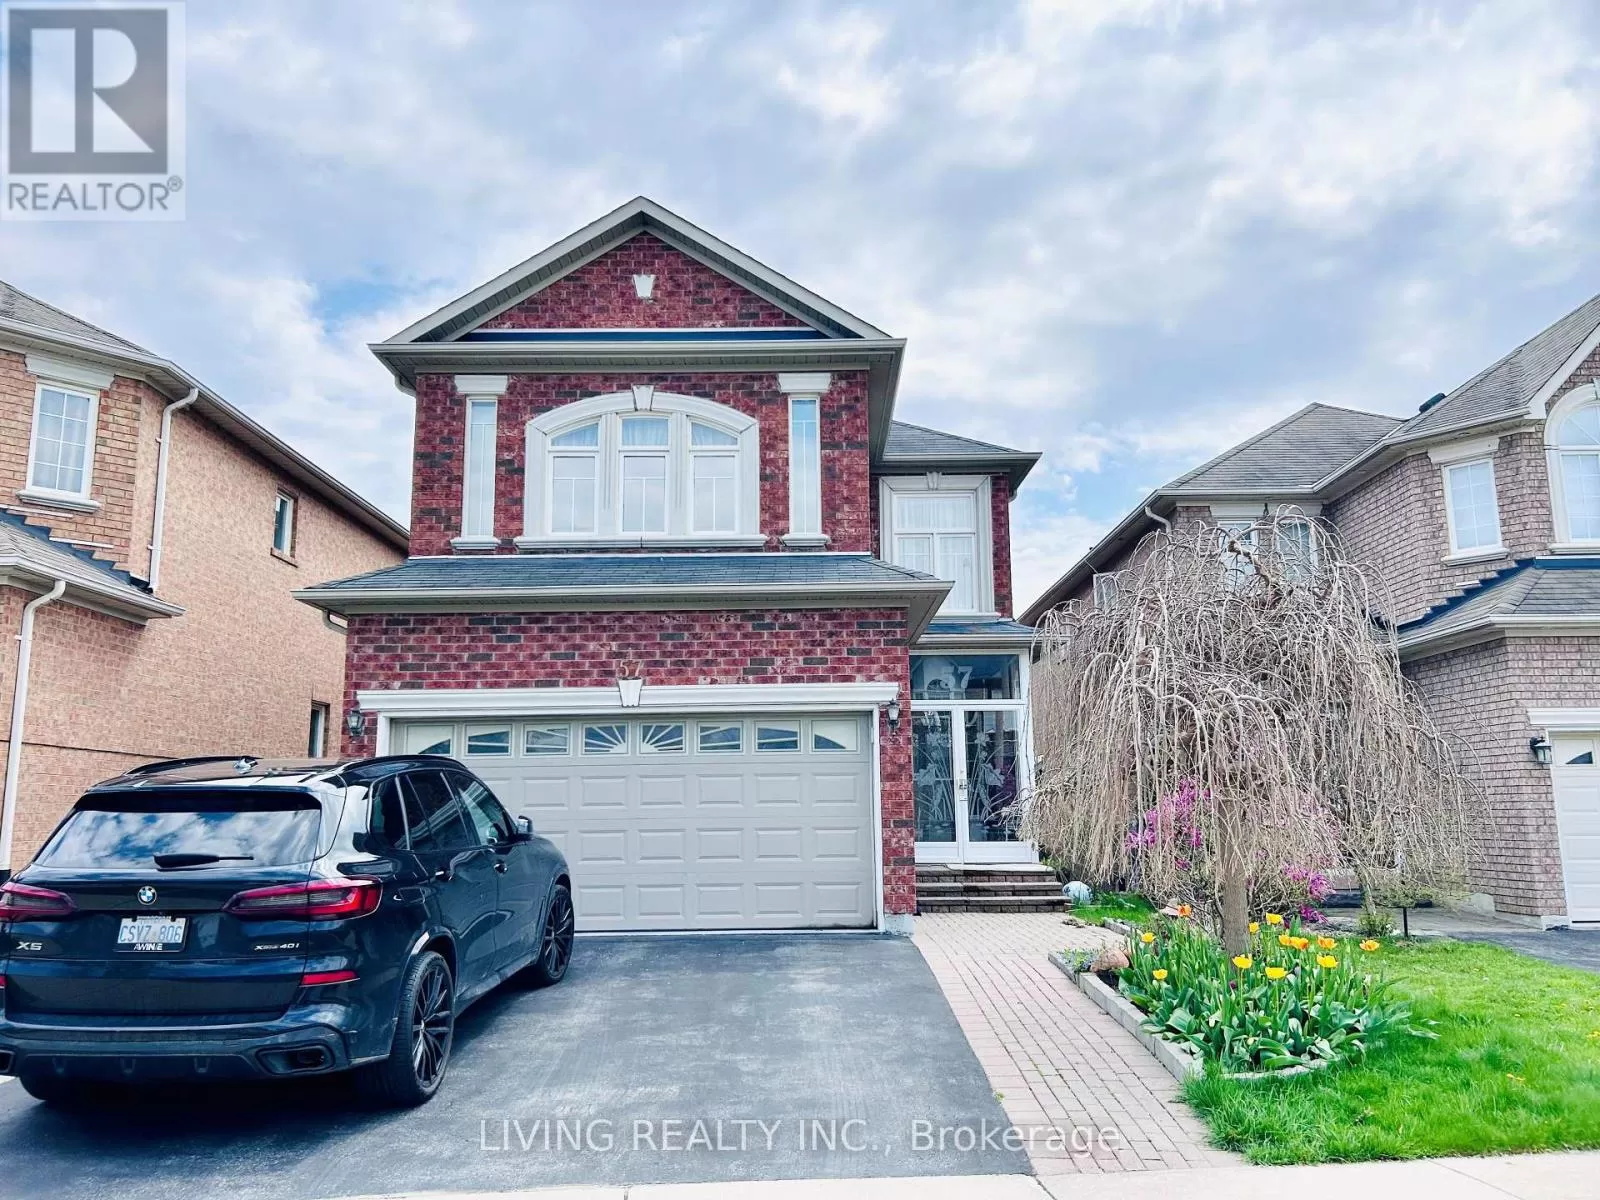 Row / Townhouse for rent: 57 Old Orchard Crescent, Richmond Hill, Ontario L4S 0A2